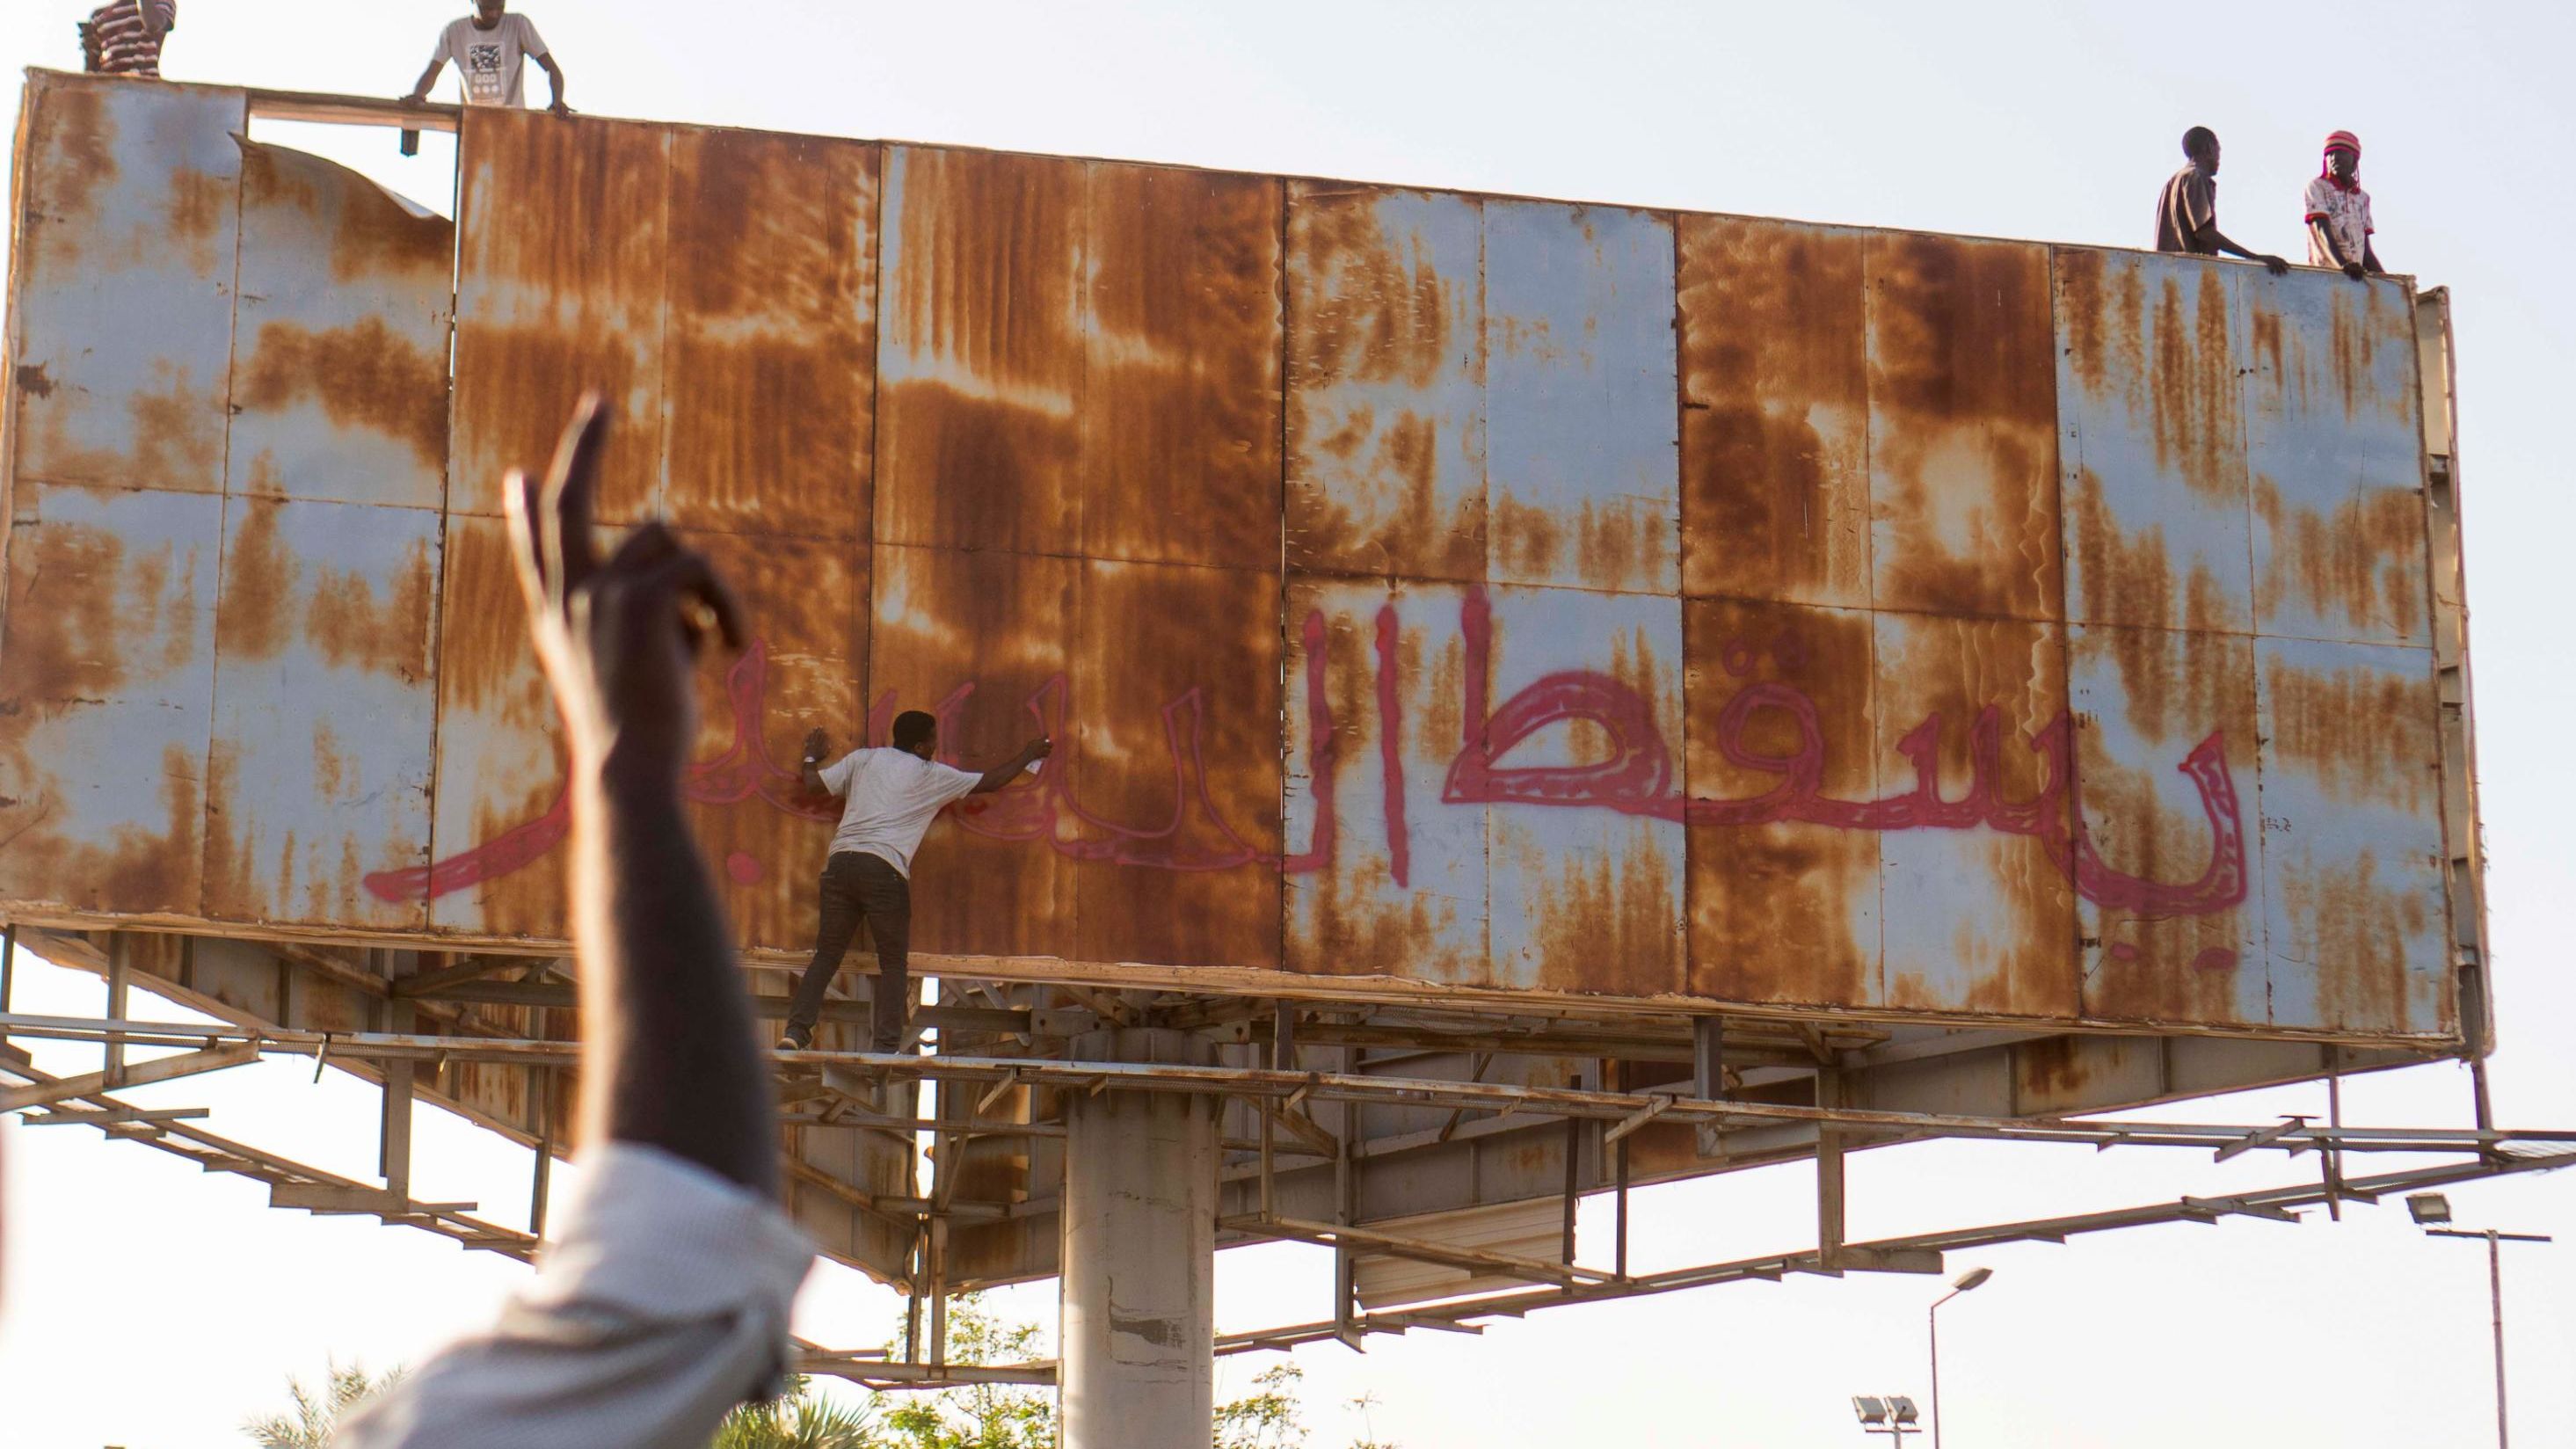 A person writes "Down with Bashir" during an April 9 demonstration in Khartoum.